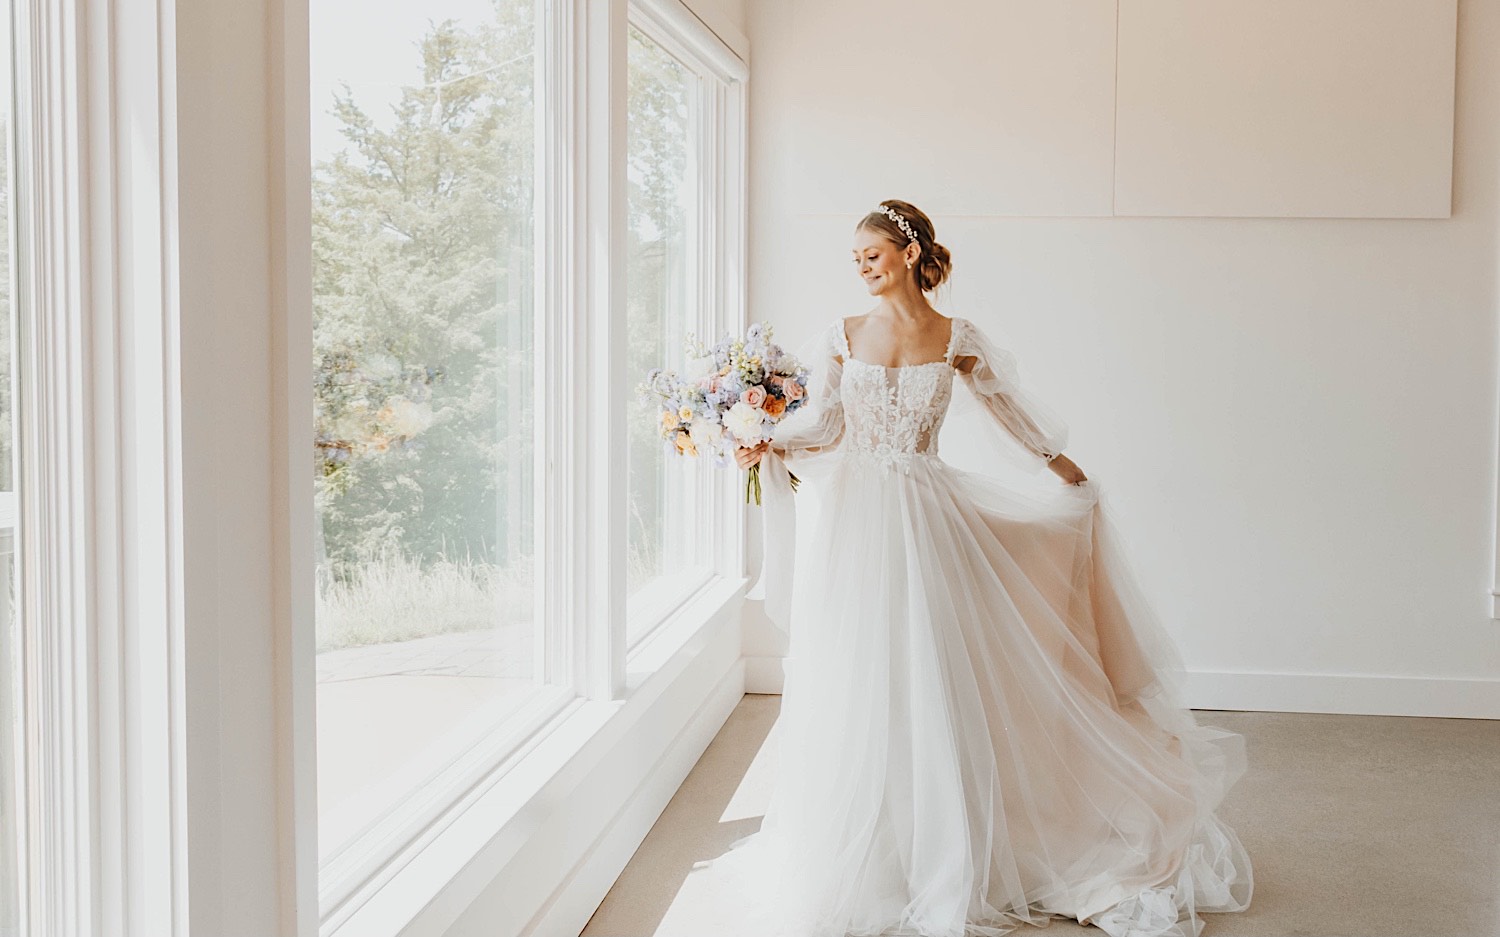 A bride stands in front of a window holding her bouquet and playing with her wedding dress during her wedding day at The Aisling